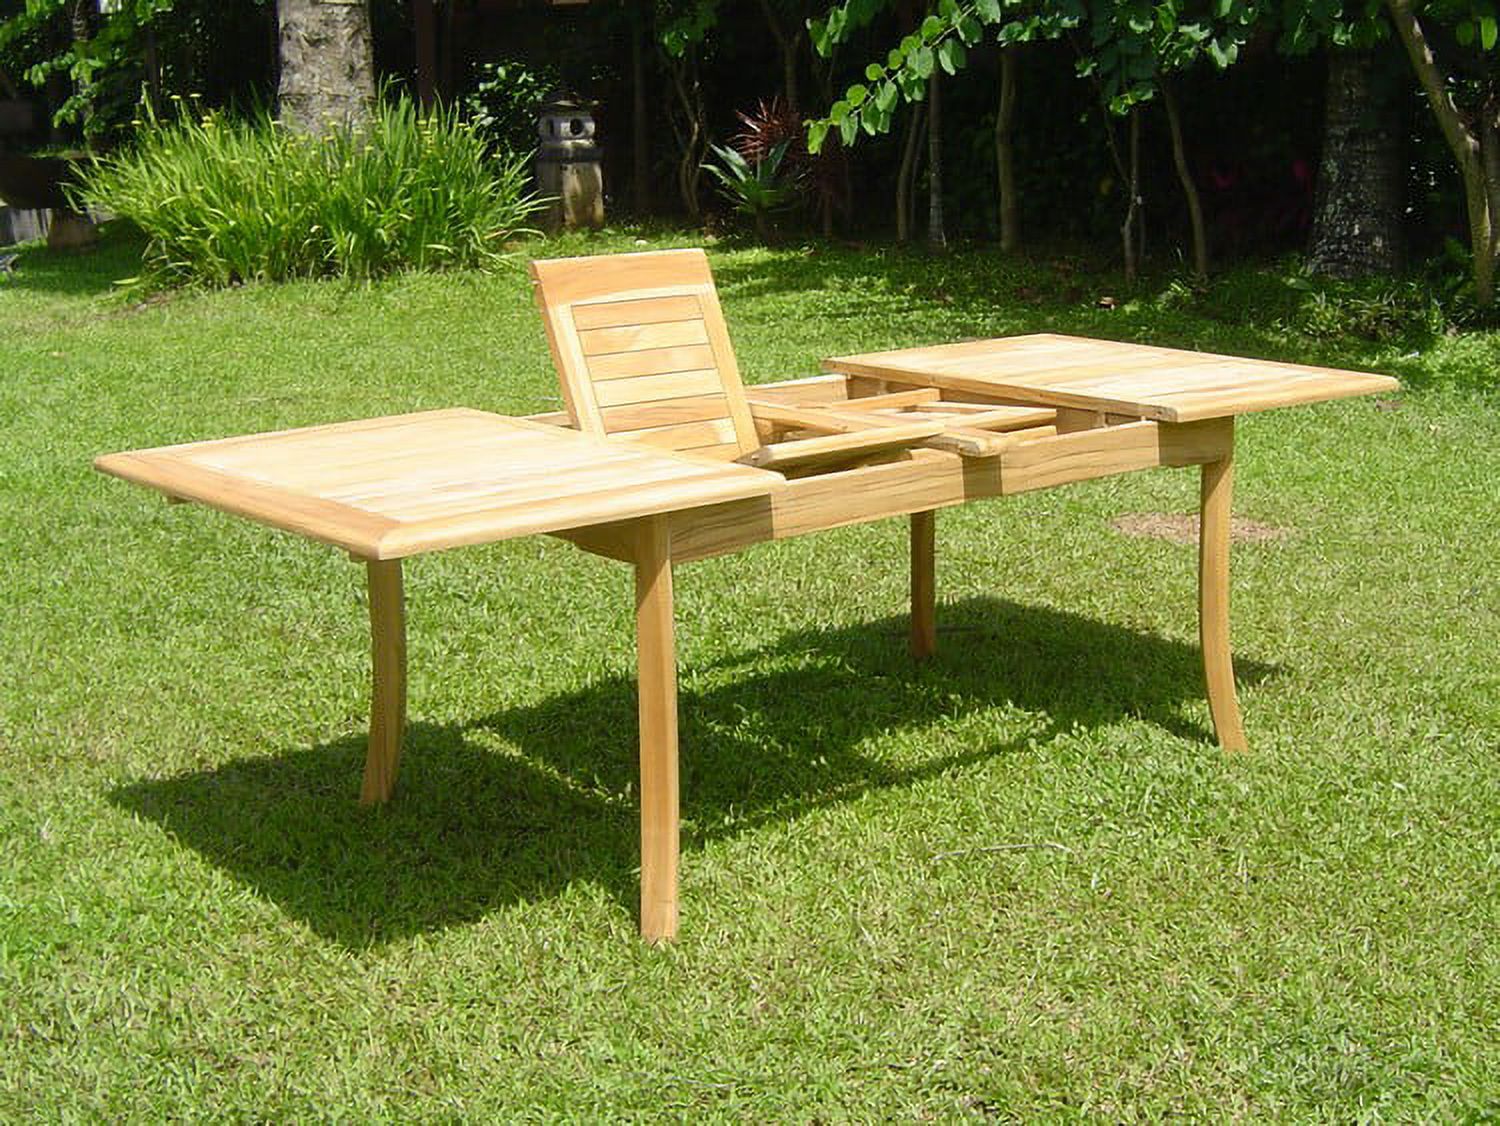 Teak Dining Set:8 Seater 9 Pc - 94" Rectangle Table And 8 Lua Stacking Arm Chairs Outdoor Patio Grade-A Teak Wood WholesaleTeak #WMDSLUd - image 2 of 4